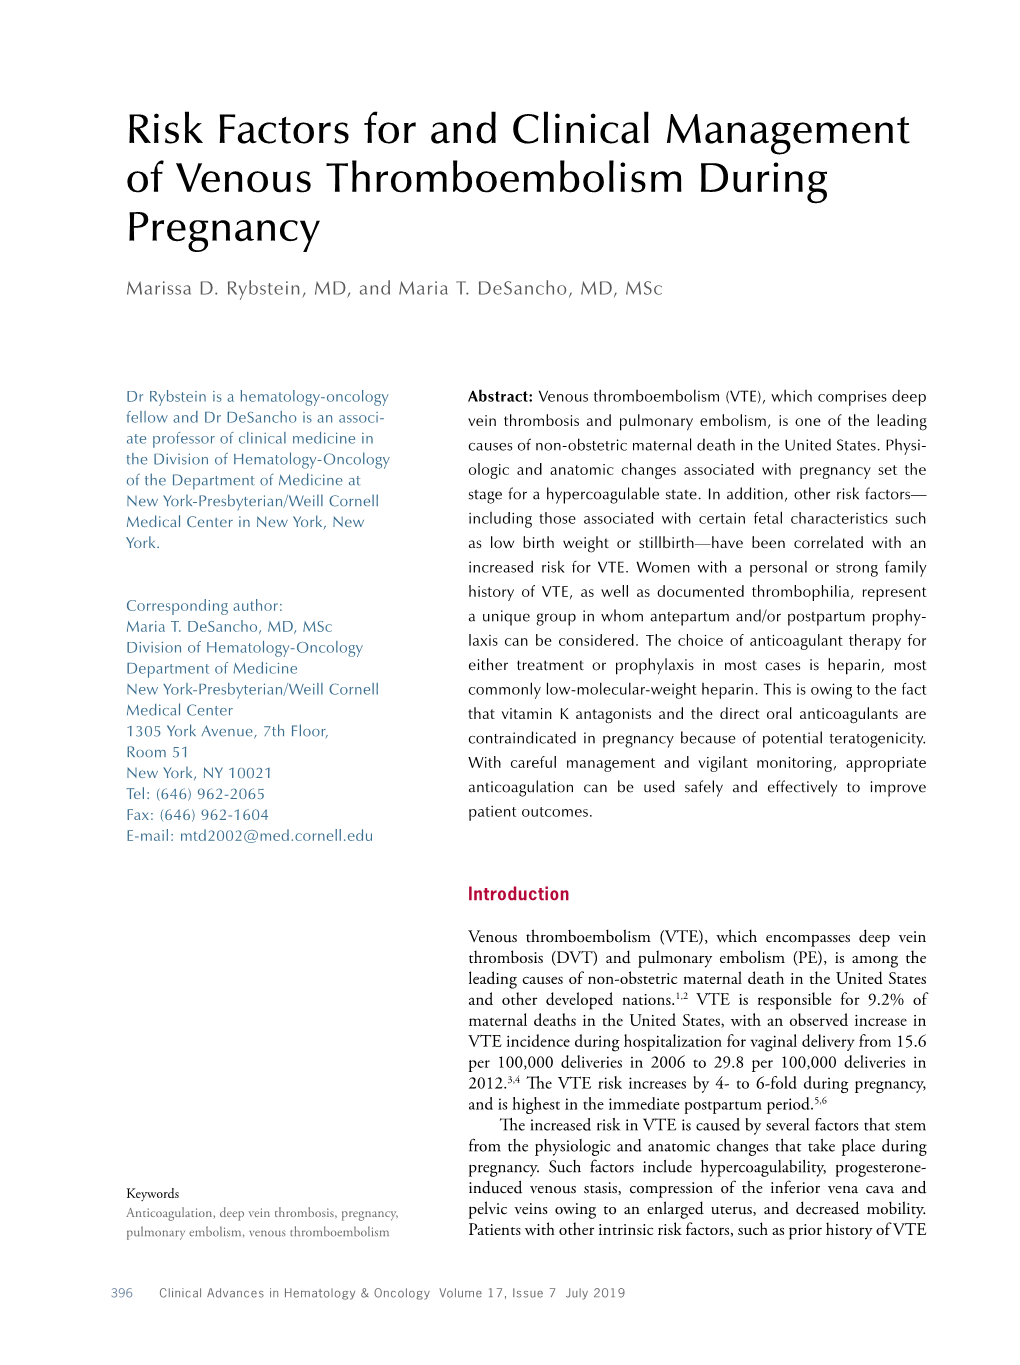 Risk Factors for and Clinical Management of Venous Thromboembolism During Pregnancy